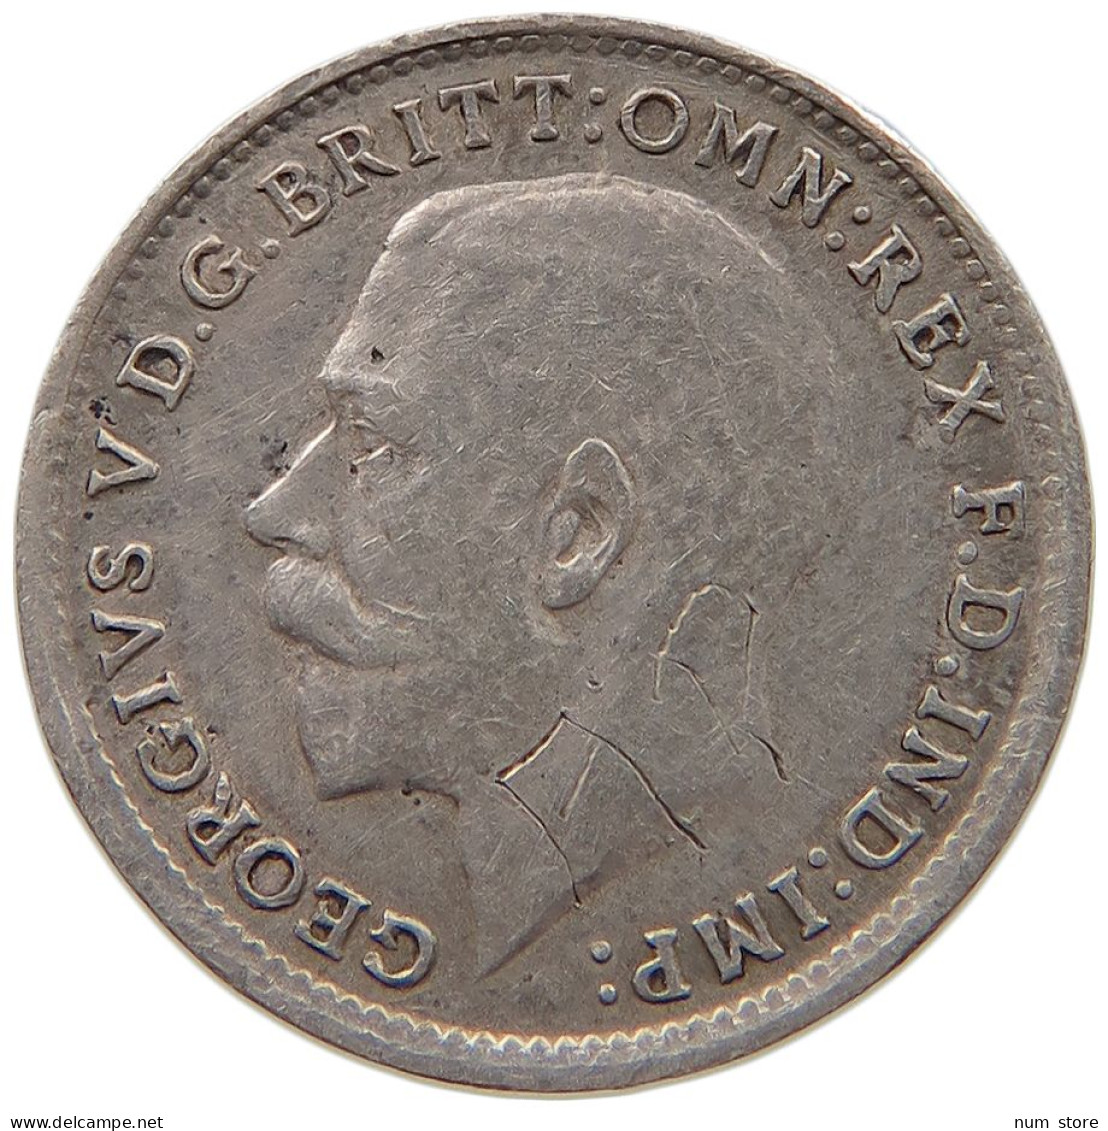 GREAT BRITAIN THREEPENCE 1916 George V. (1910-1936) ENGRAVED #c045 0273 - F. 3 Pence